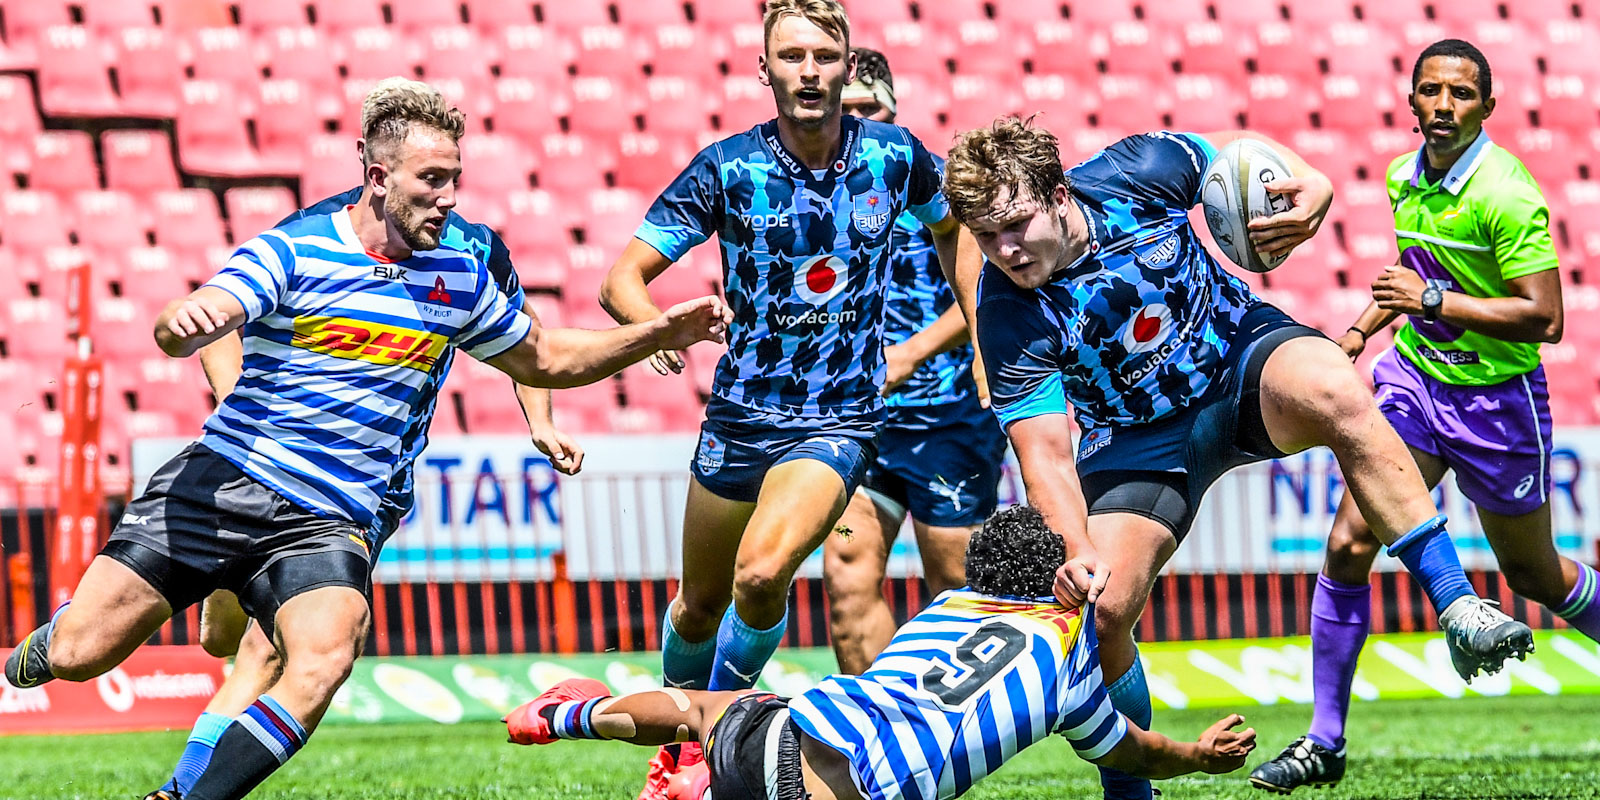 Drama galore in opening round of SA Rugby U21 Championship SA Rugby